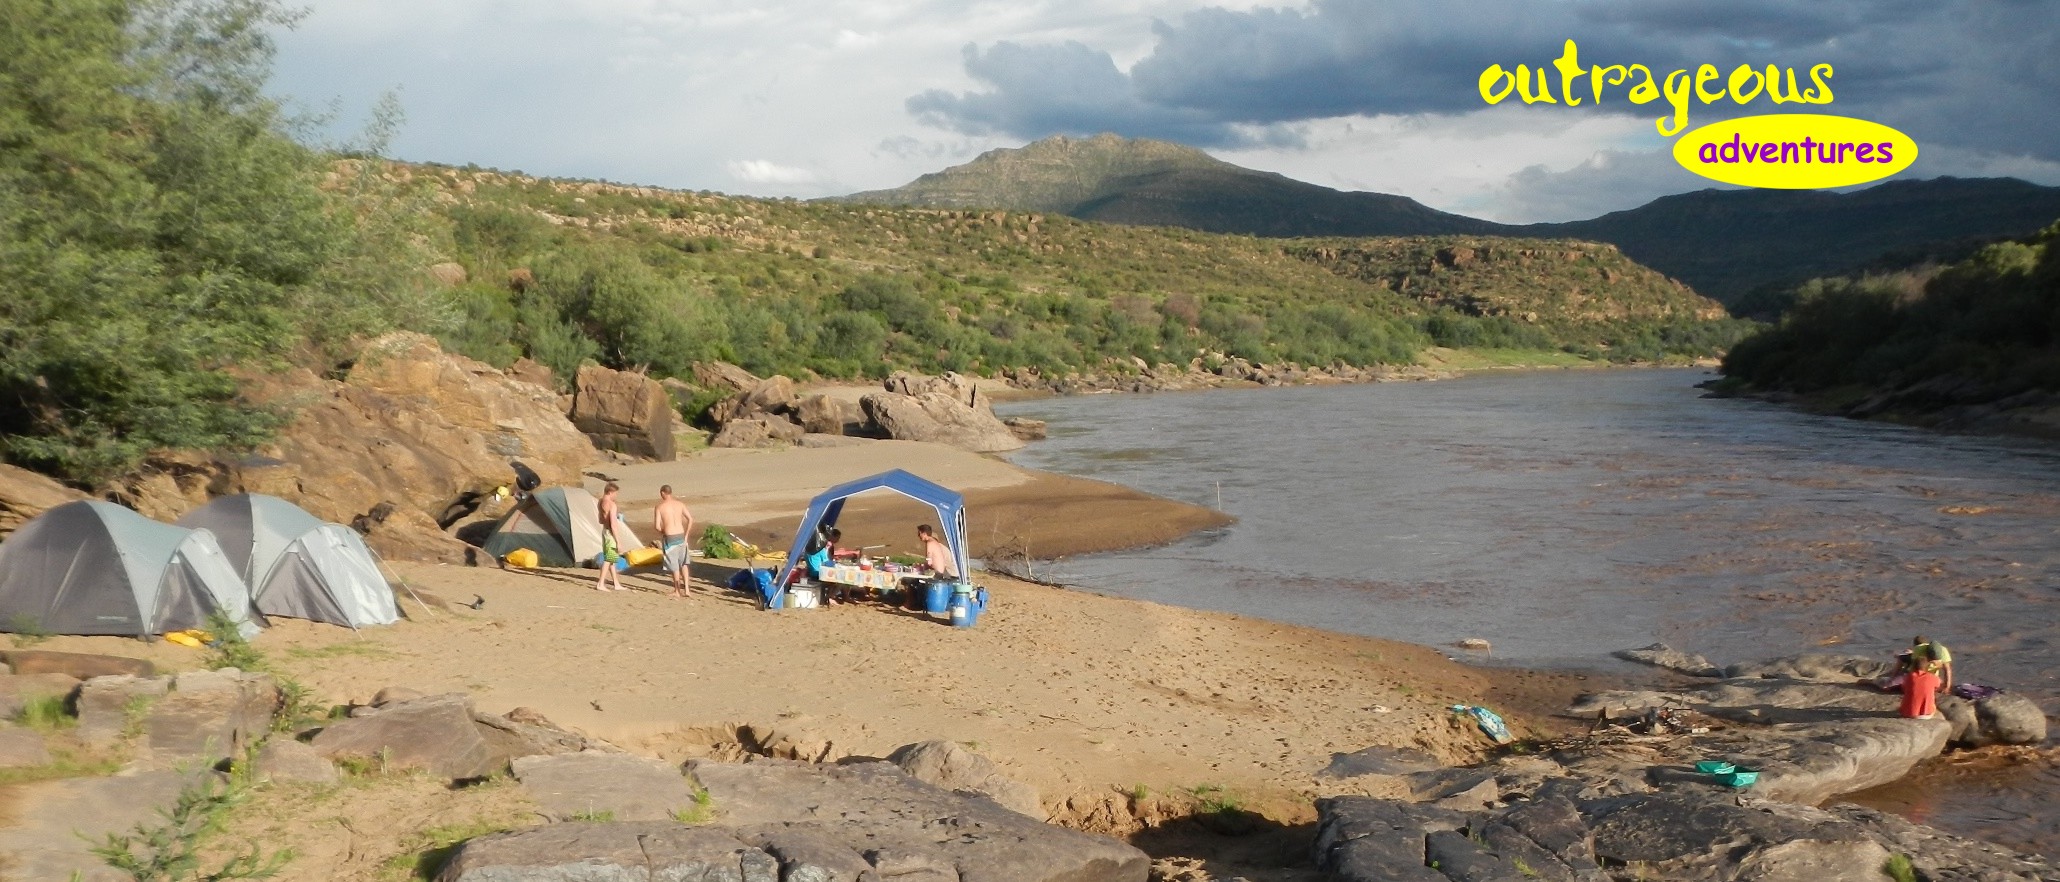 camping on the sandy beaches next to the river on a multi-day, self-contained rafting adventure.